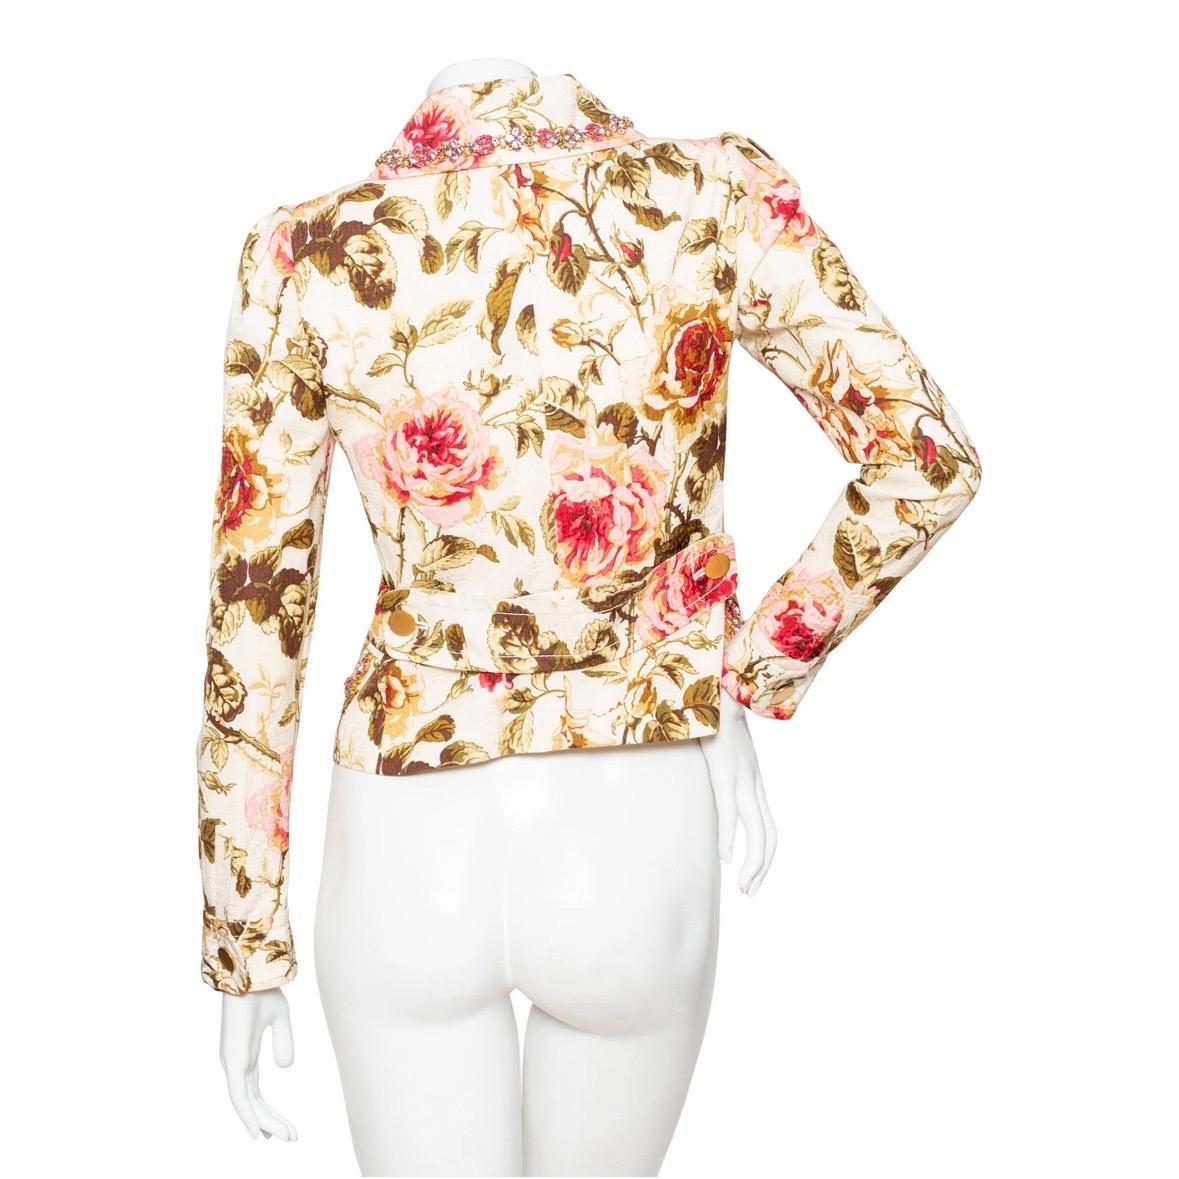 Dolce & Gabbana Floral Print Rhinestone Collared Jacket In Good Condition For Sale In Los Angeles, CA